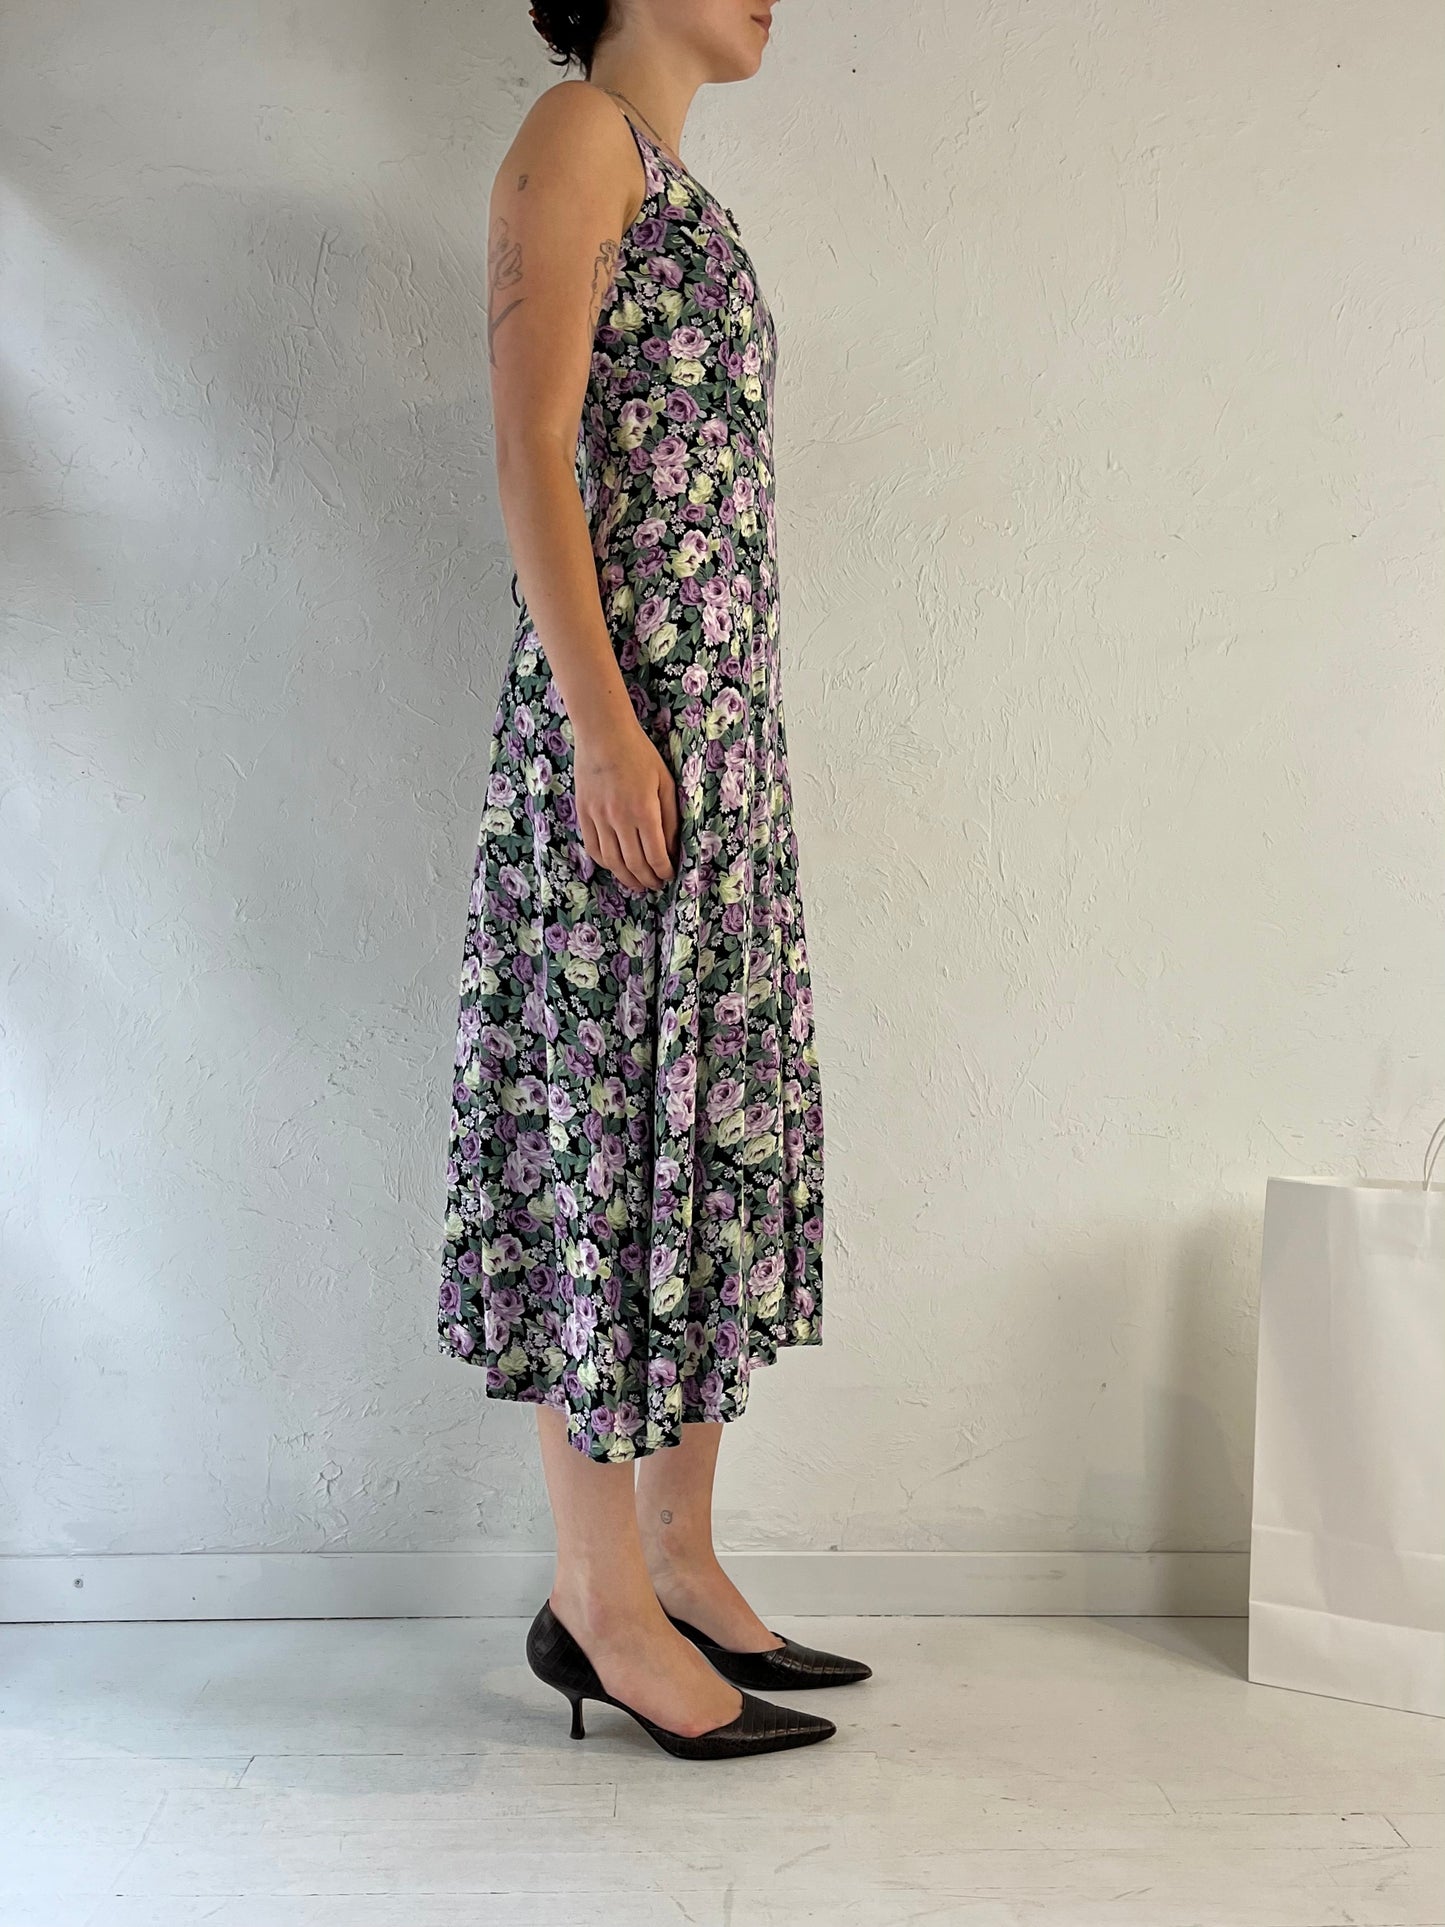 90s 'All That Jazz' Purple Floral Rayon Dress / Small